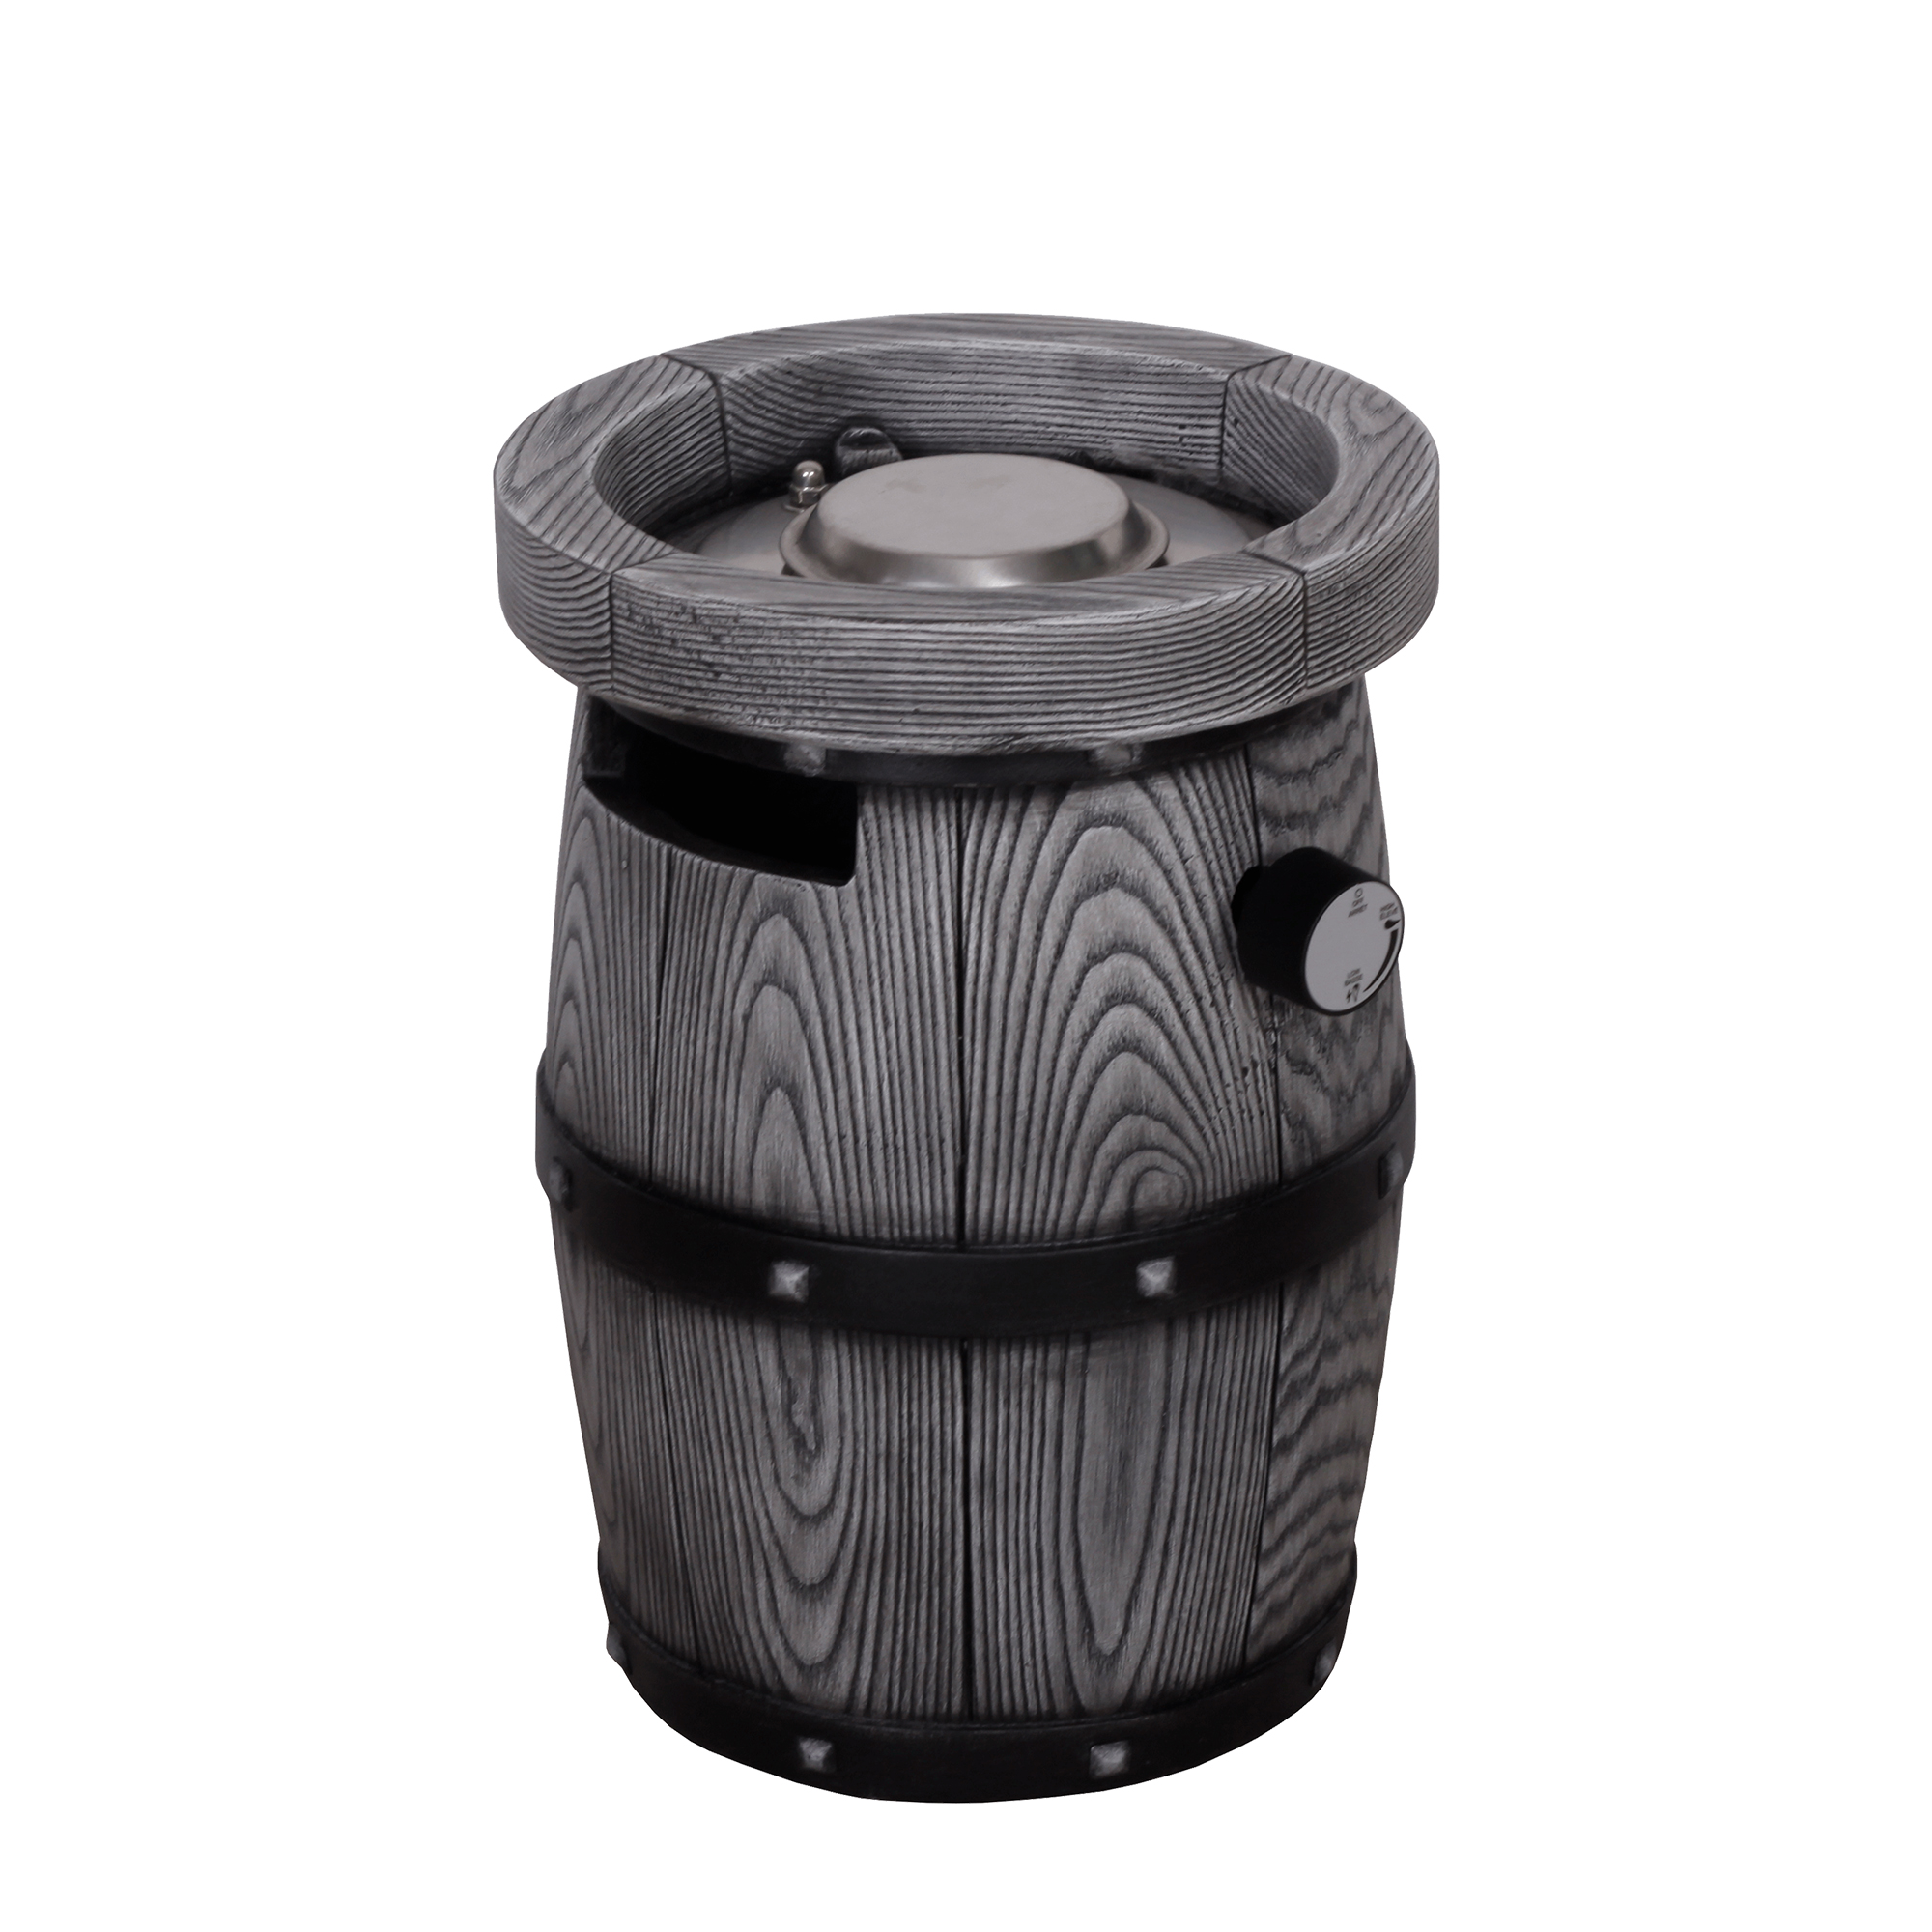 14-inch Round Fire Pit,10000 BTU , suitable for the garden or balcony.